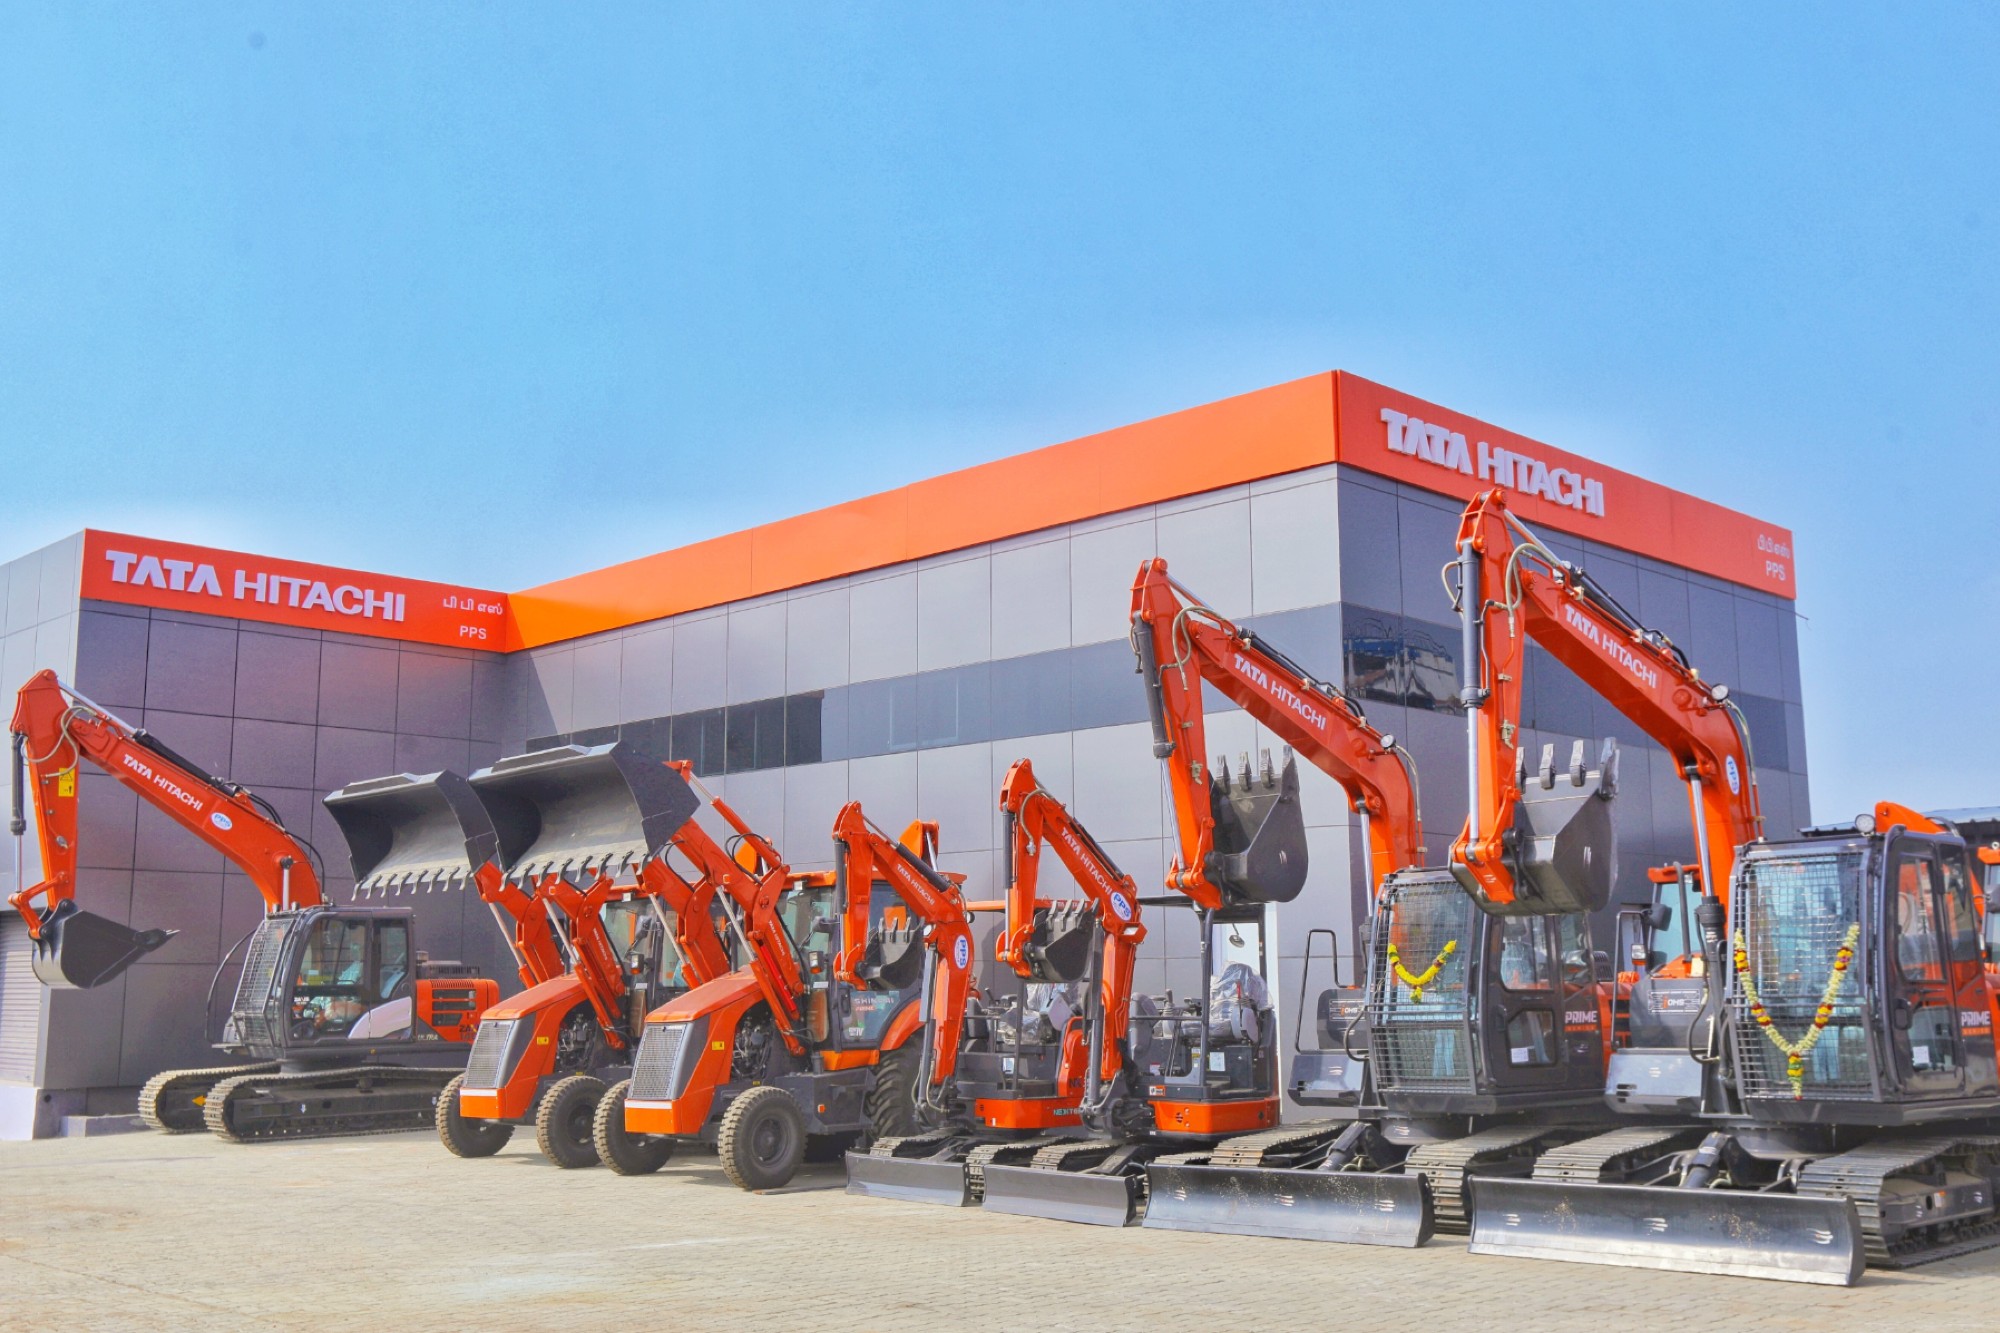 PPS Motors, a prominent player in the dealer network, has unveiled a cutting-edge 3S facility dedicated to Tata Hitachi, bolstering its commitment to serving customers in the construction and mining equipment domain.